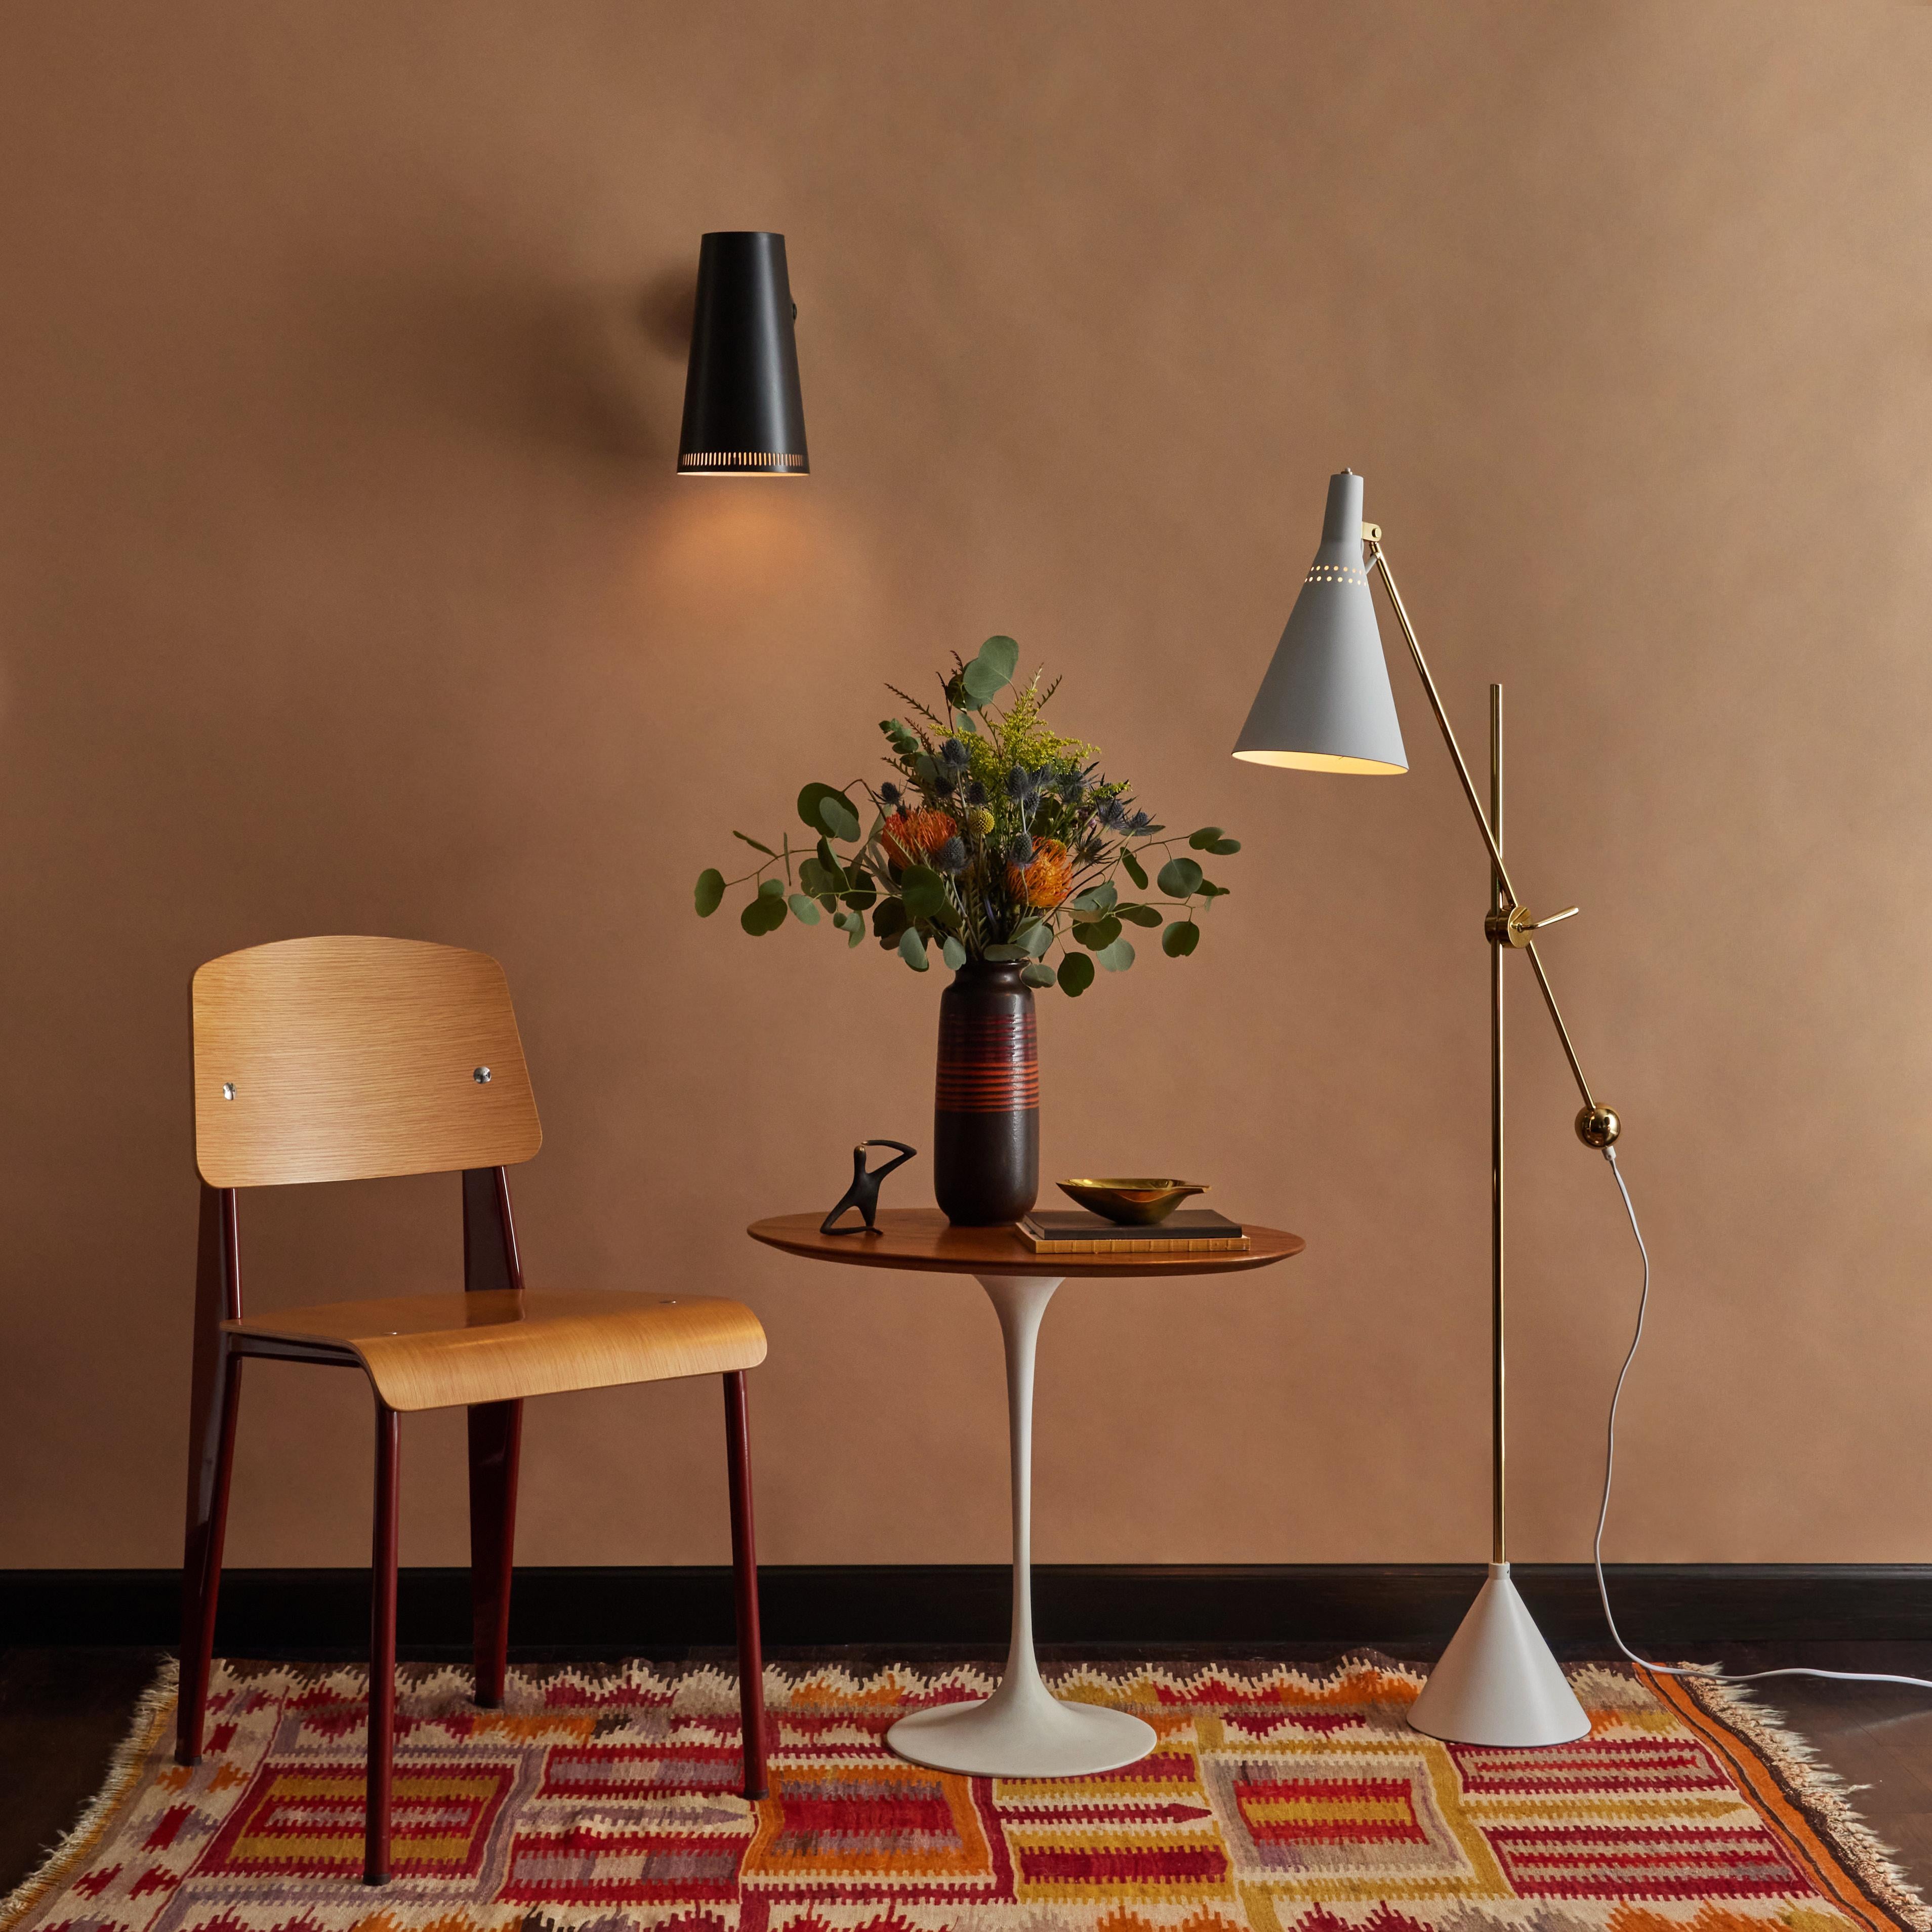 Tapio Wirkkala 'Crane' Articulating Floor Lamp in White for Innolux Oy.  Originally produced as the in the 1950s as the Model #K-10-11 by Idman, this newly authorized re-edition of the iconic lamp is made by Innolux Oy of Finland with the same